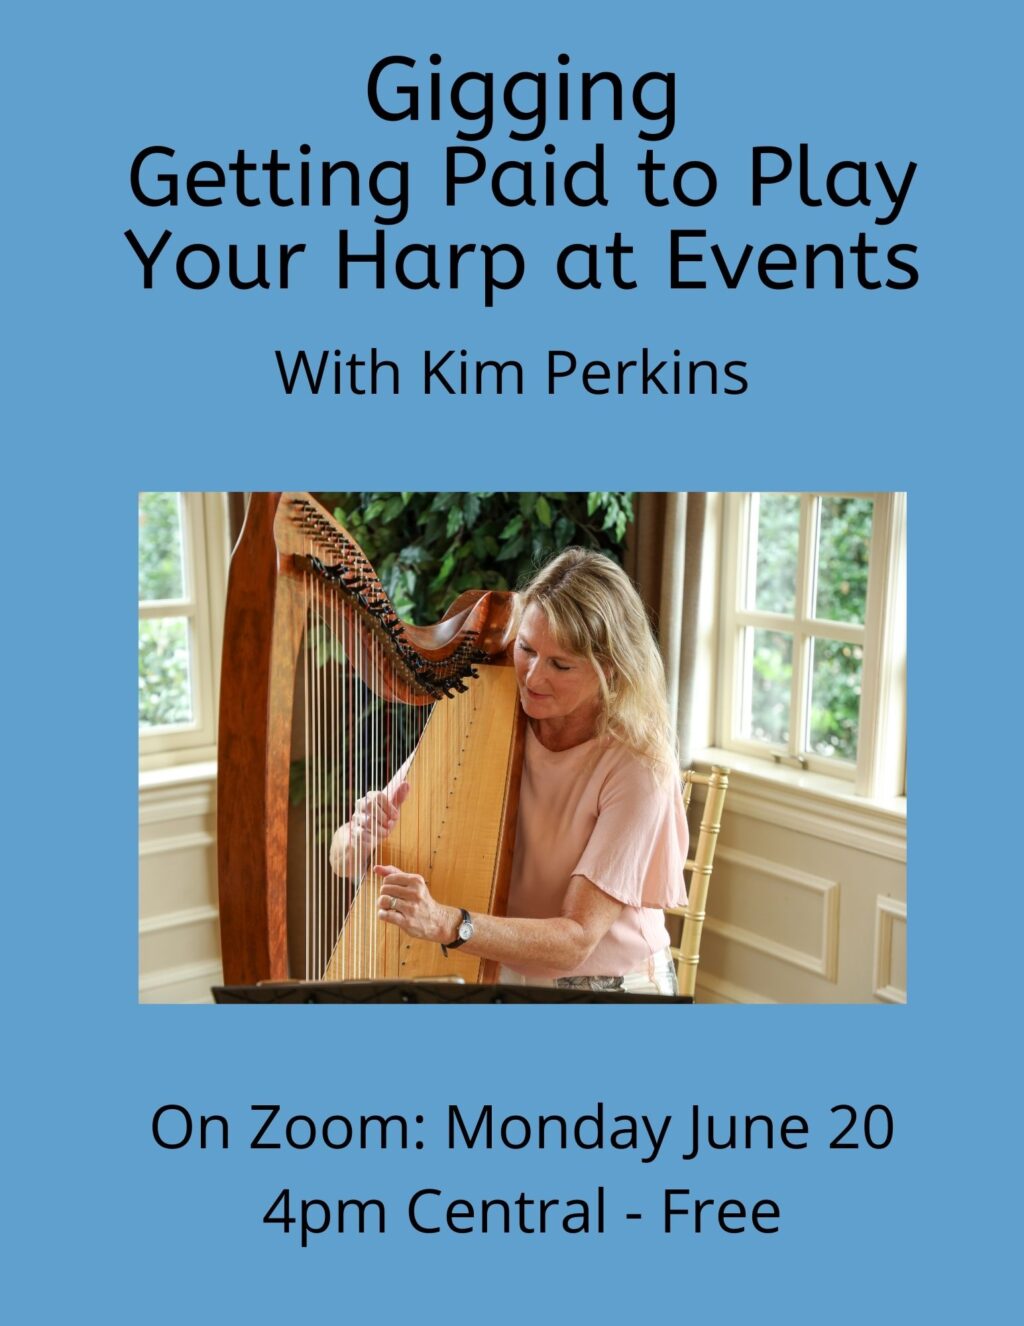 Kim Perkins Free Gigging Zoom Lecture at 4pm Central on Monday, June 20, 2022